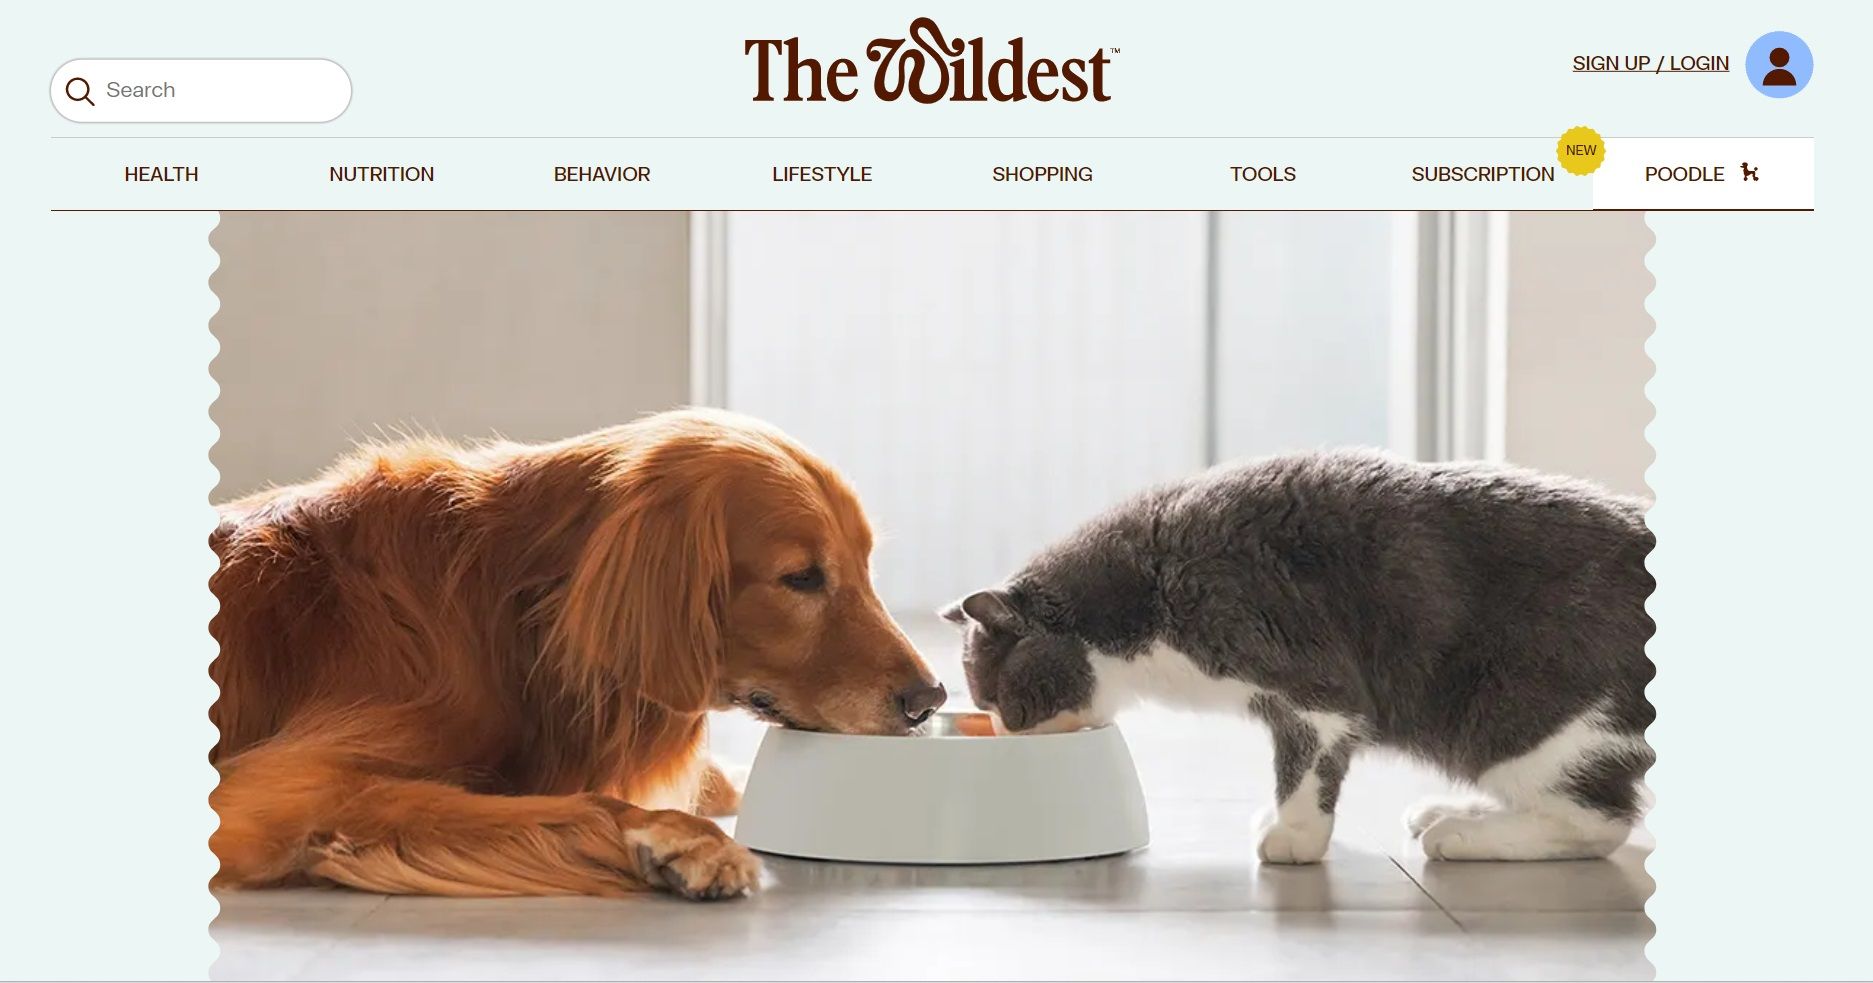 Dog and cat image on The Wildest